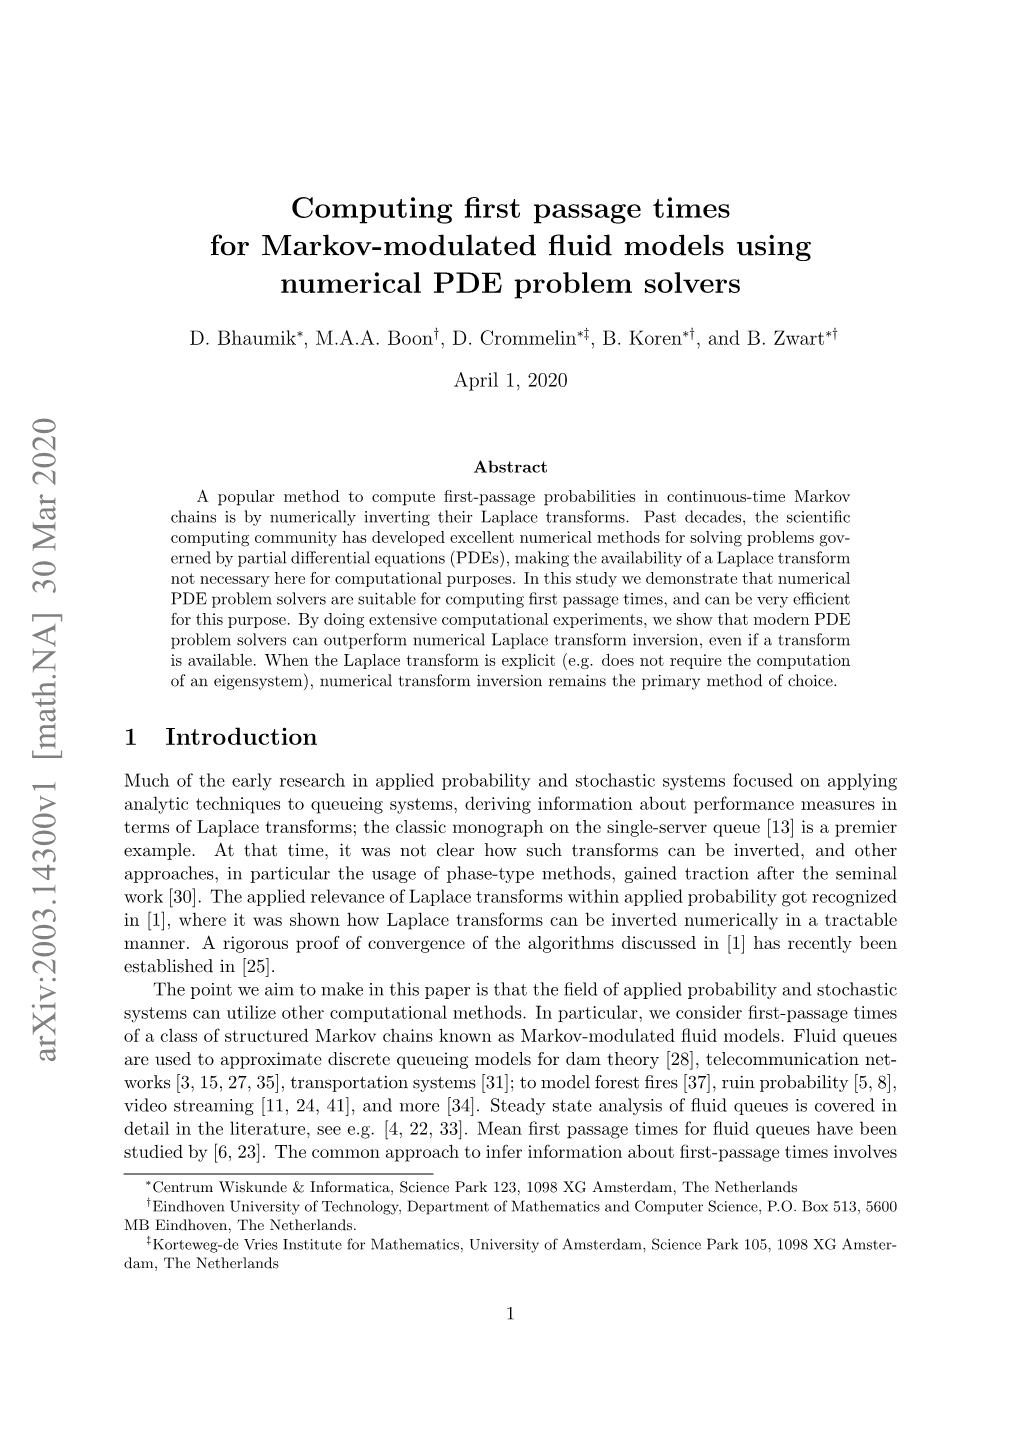 Computing First Passage Times for Markov-Modulated Fluid Models